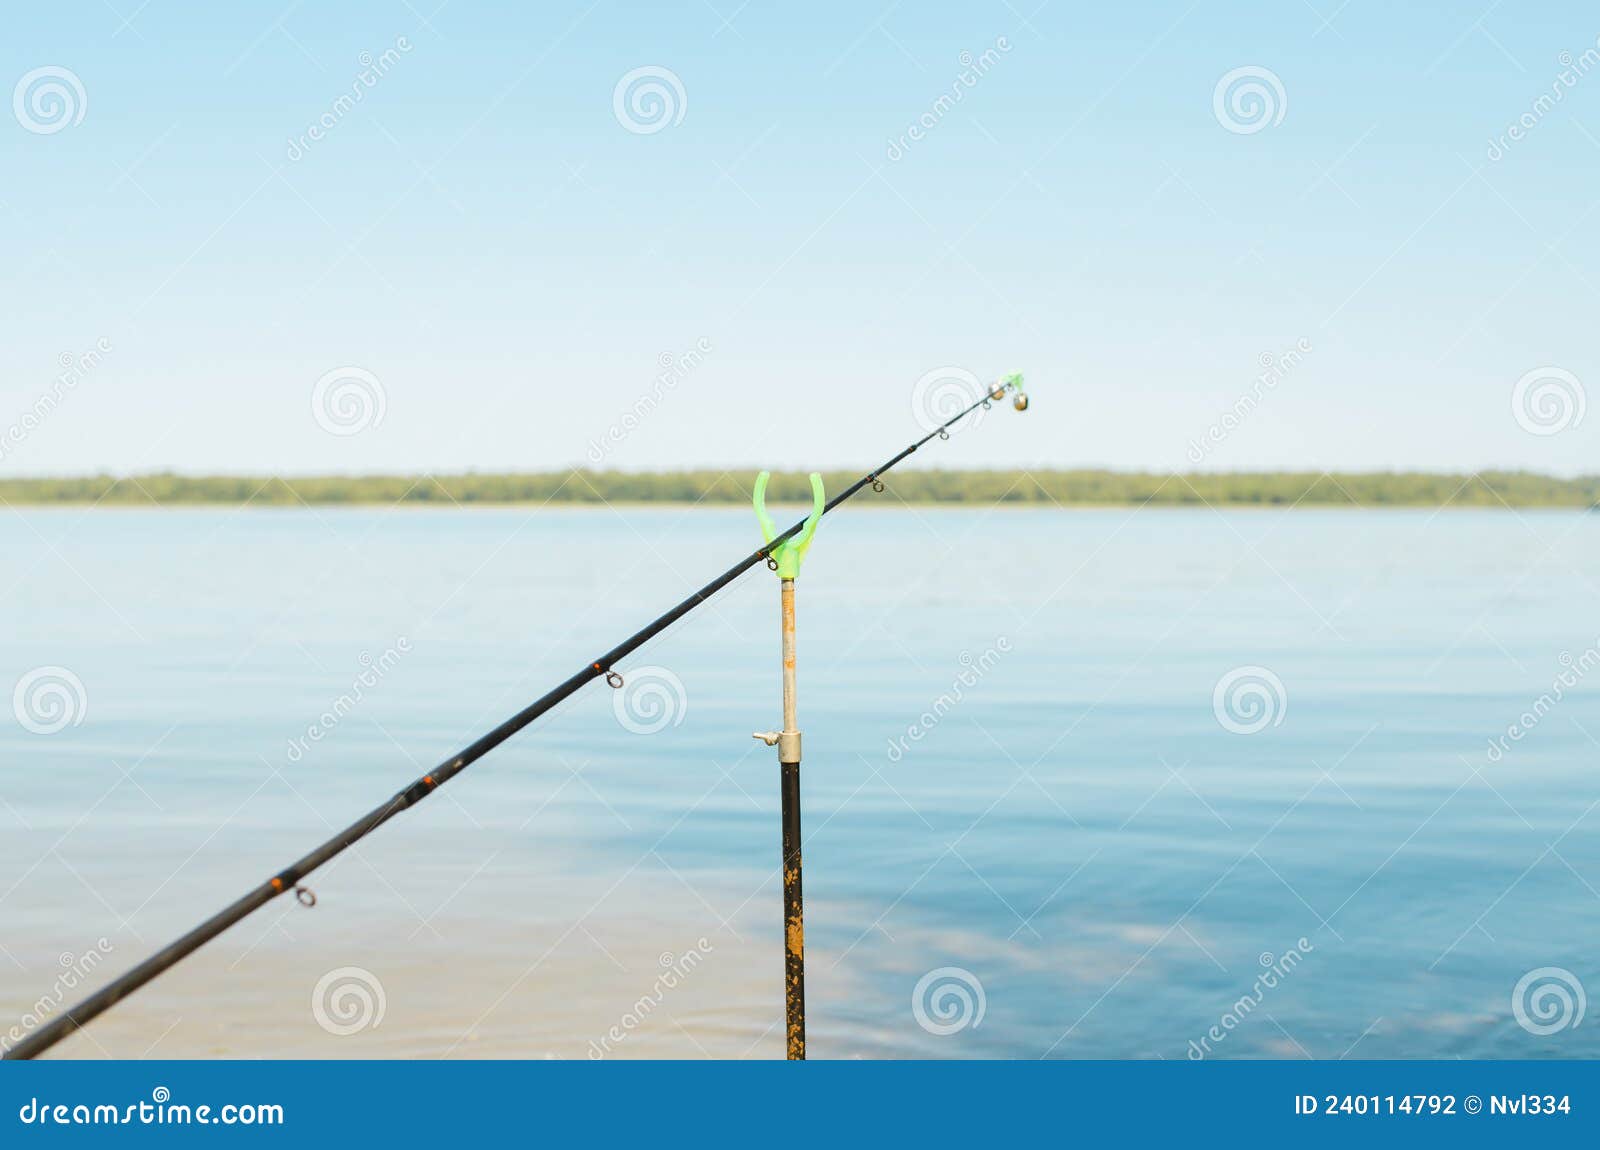 Close-up of Fishing Rod with Bell on Stand on Lake Outdoors